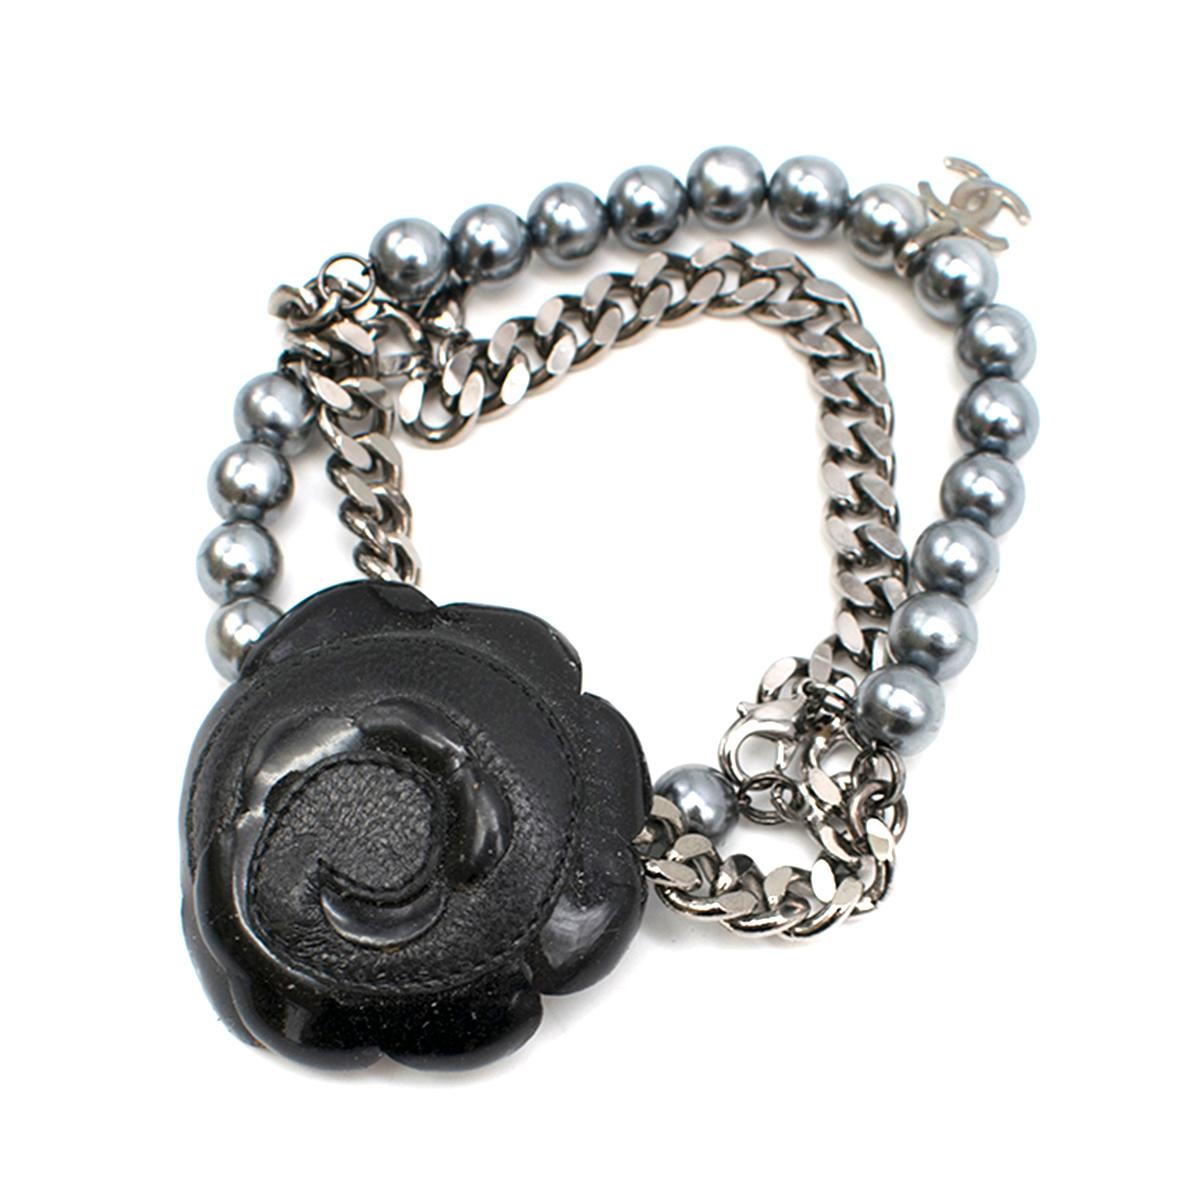 Chanel Black Camellia Faux Pearl & Chain Bracelet

- Double strap bracelet made of metal chain and faux pearls
- Chanel logo detail 
- Removable black leather camellia with the velcro fastener
- Bracelet does not have main clasp
- Small size

Please